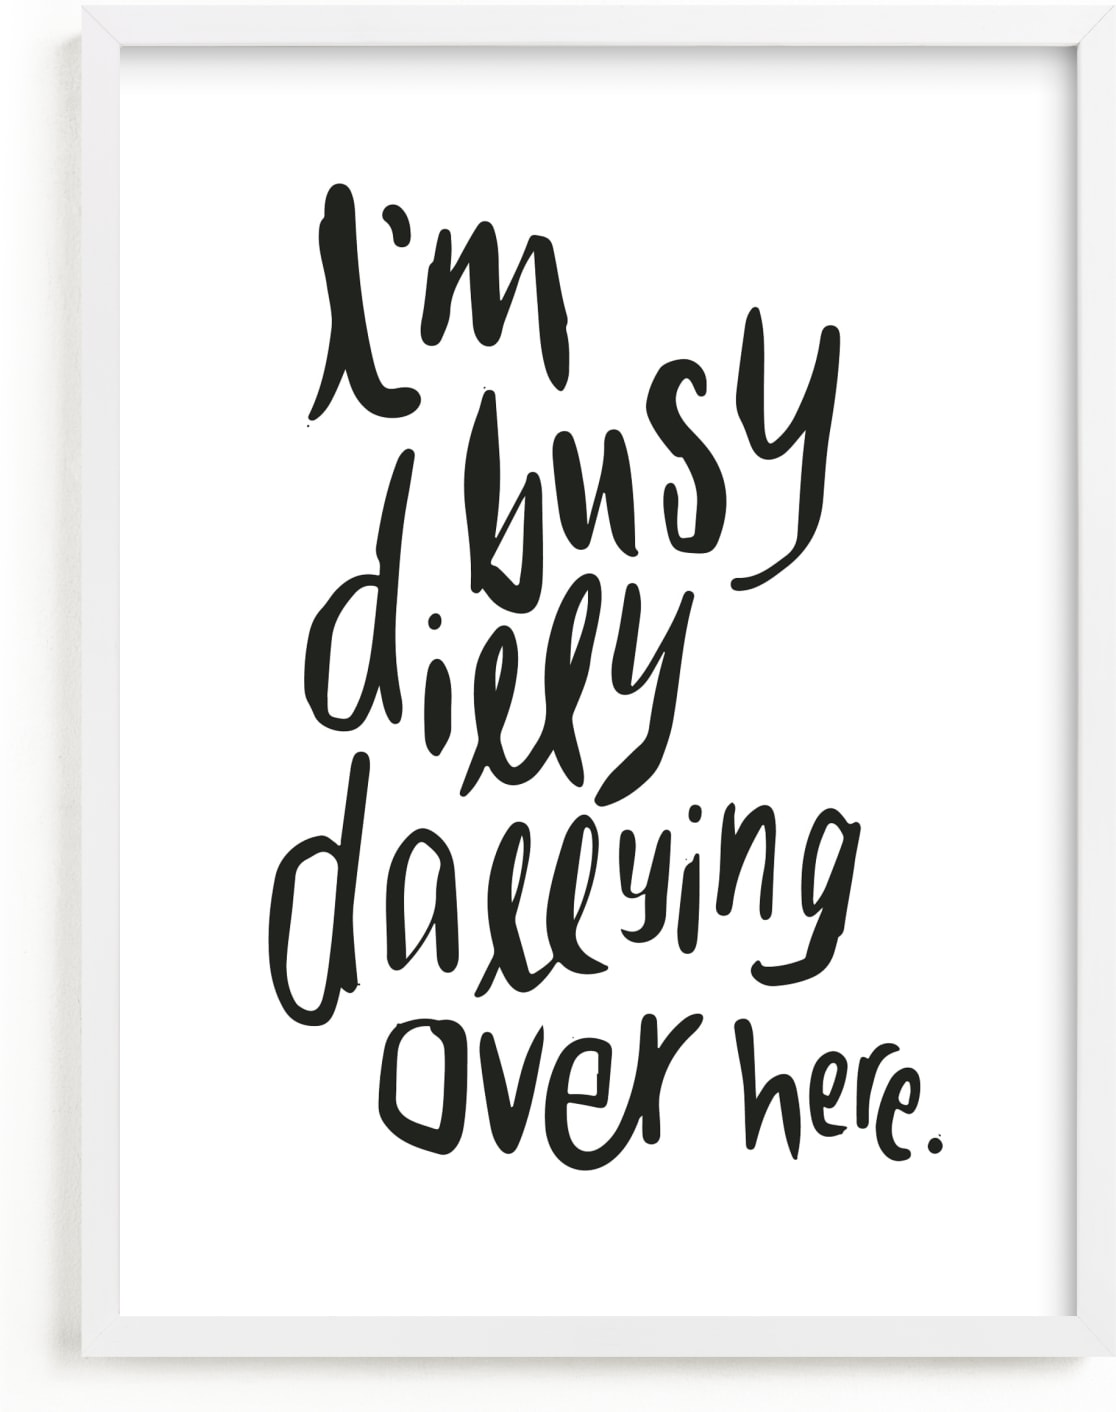 This is a black and white kids wall art by Inkblot Design called Dillydally all day.